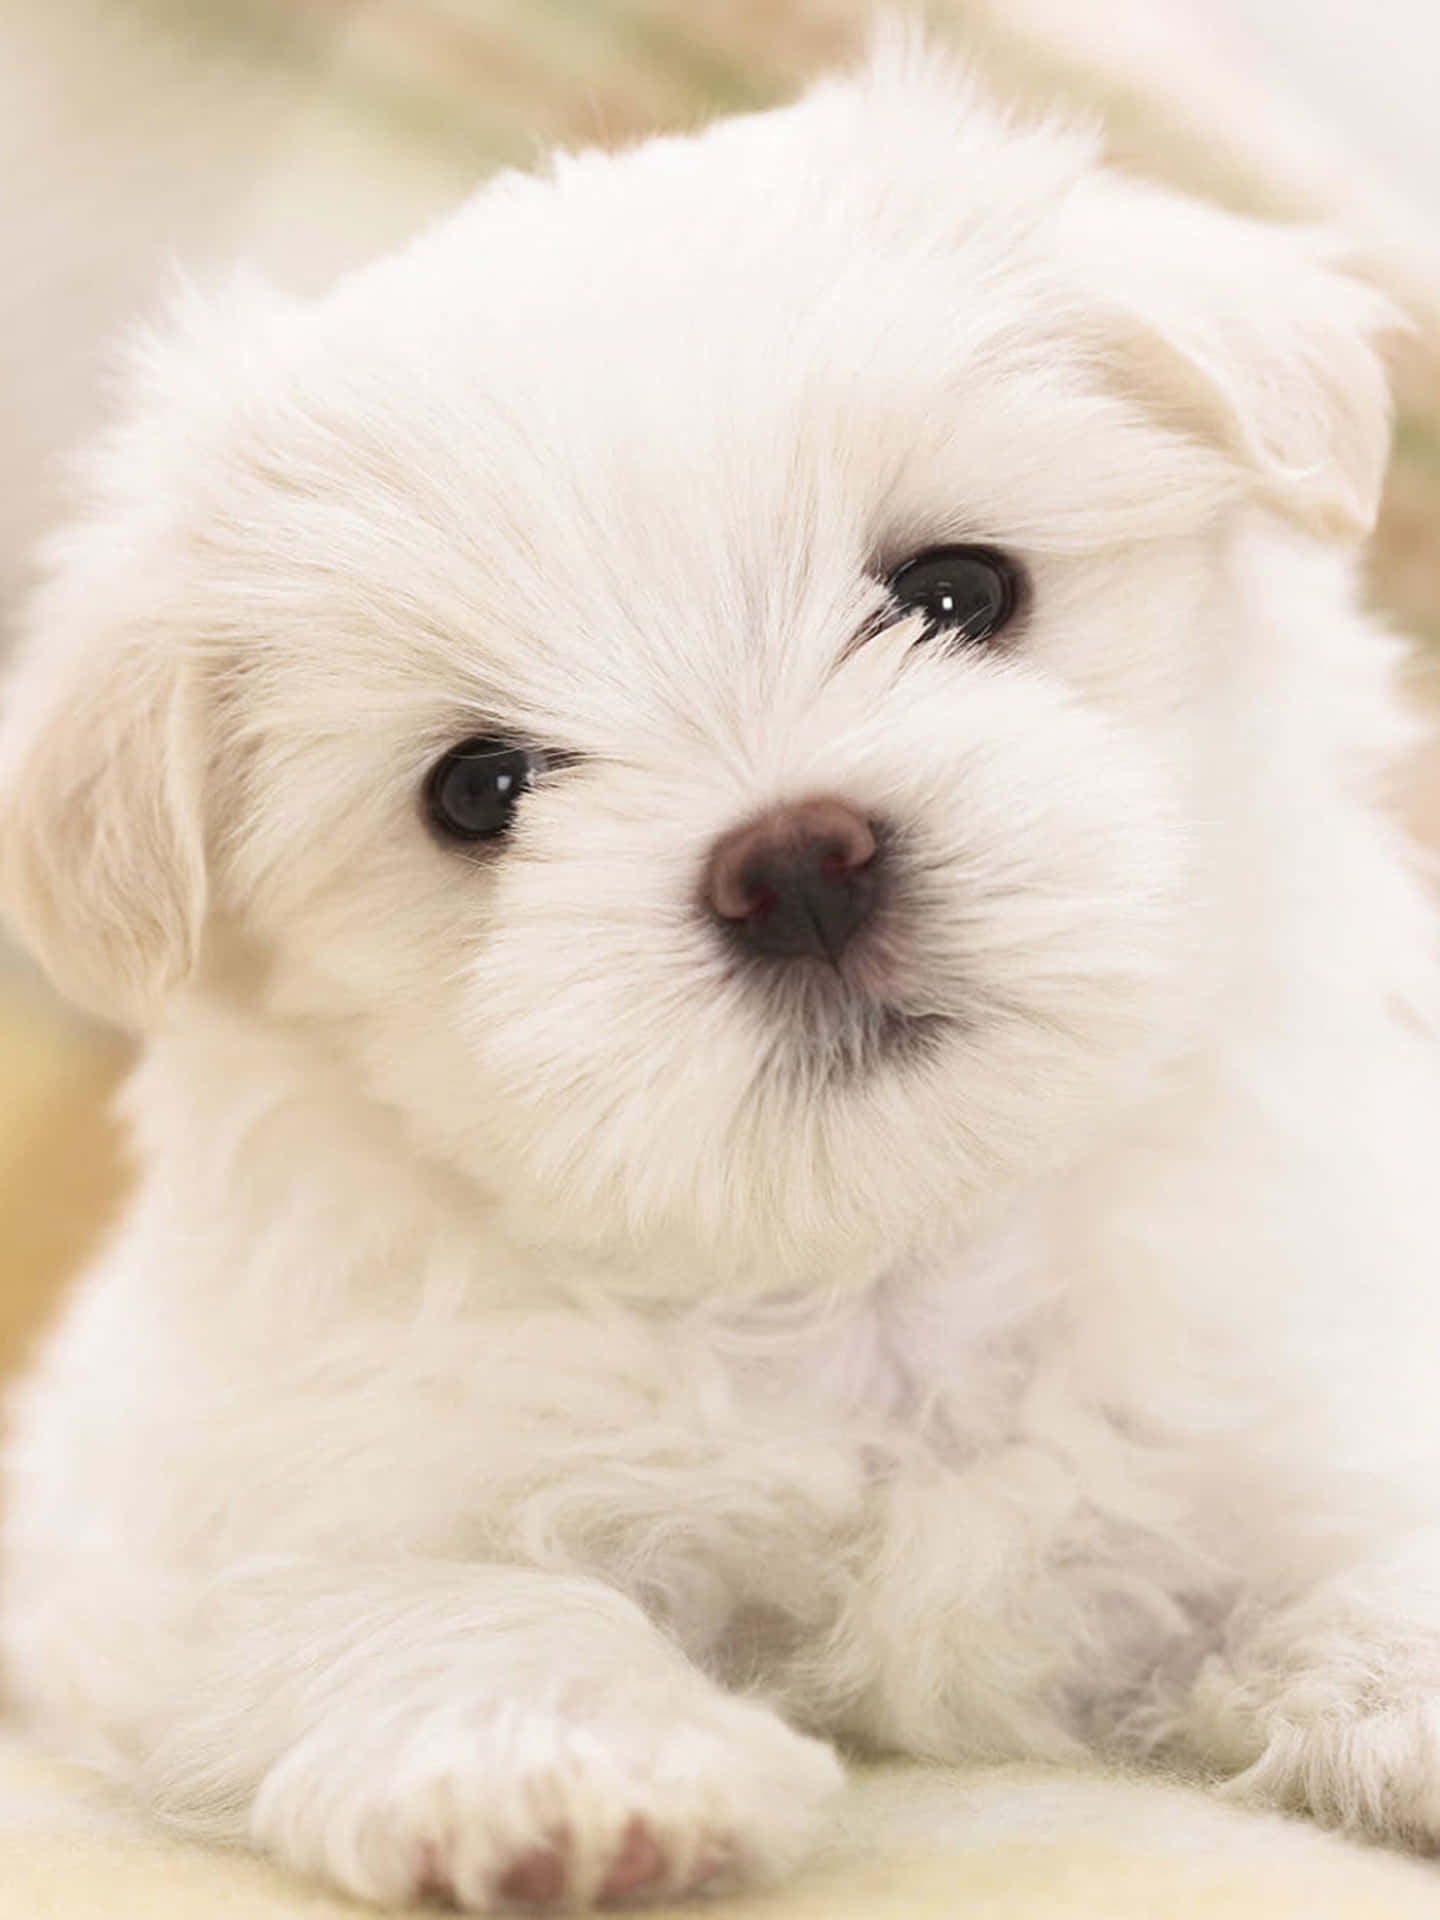 These two gorgeous little Maltese Puppies are all ready to find a loving home!